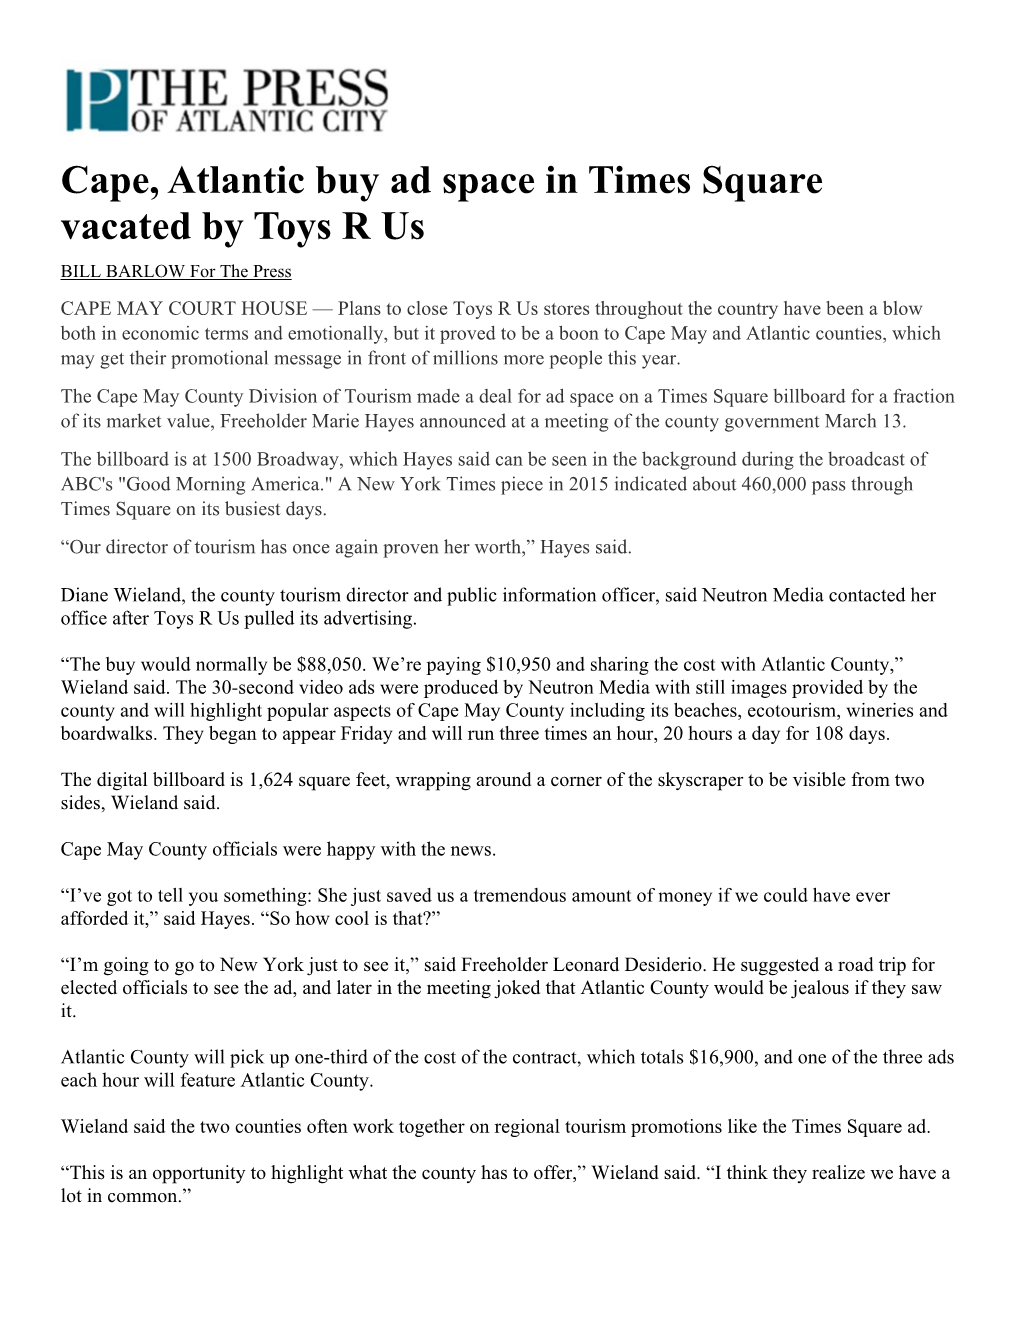 Cape, Atlantic Buy Ad Space in Times Square Vacated by Toys R Us